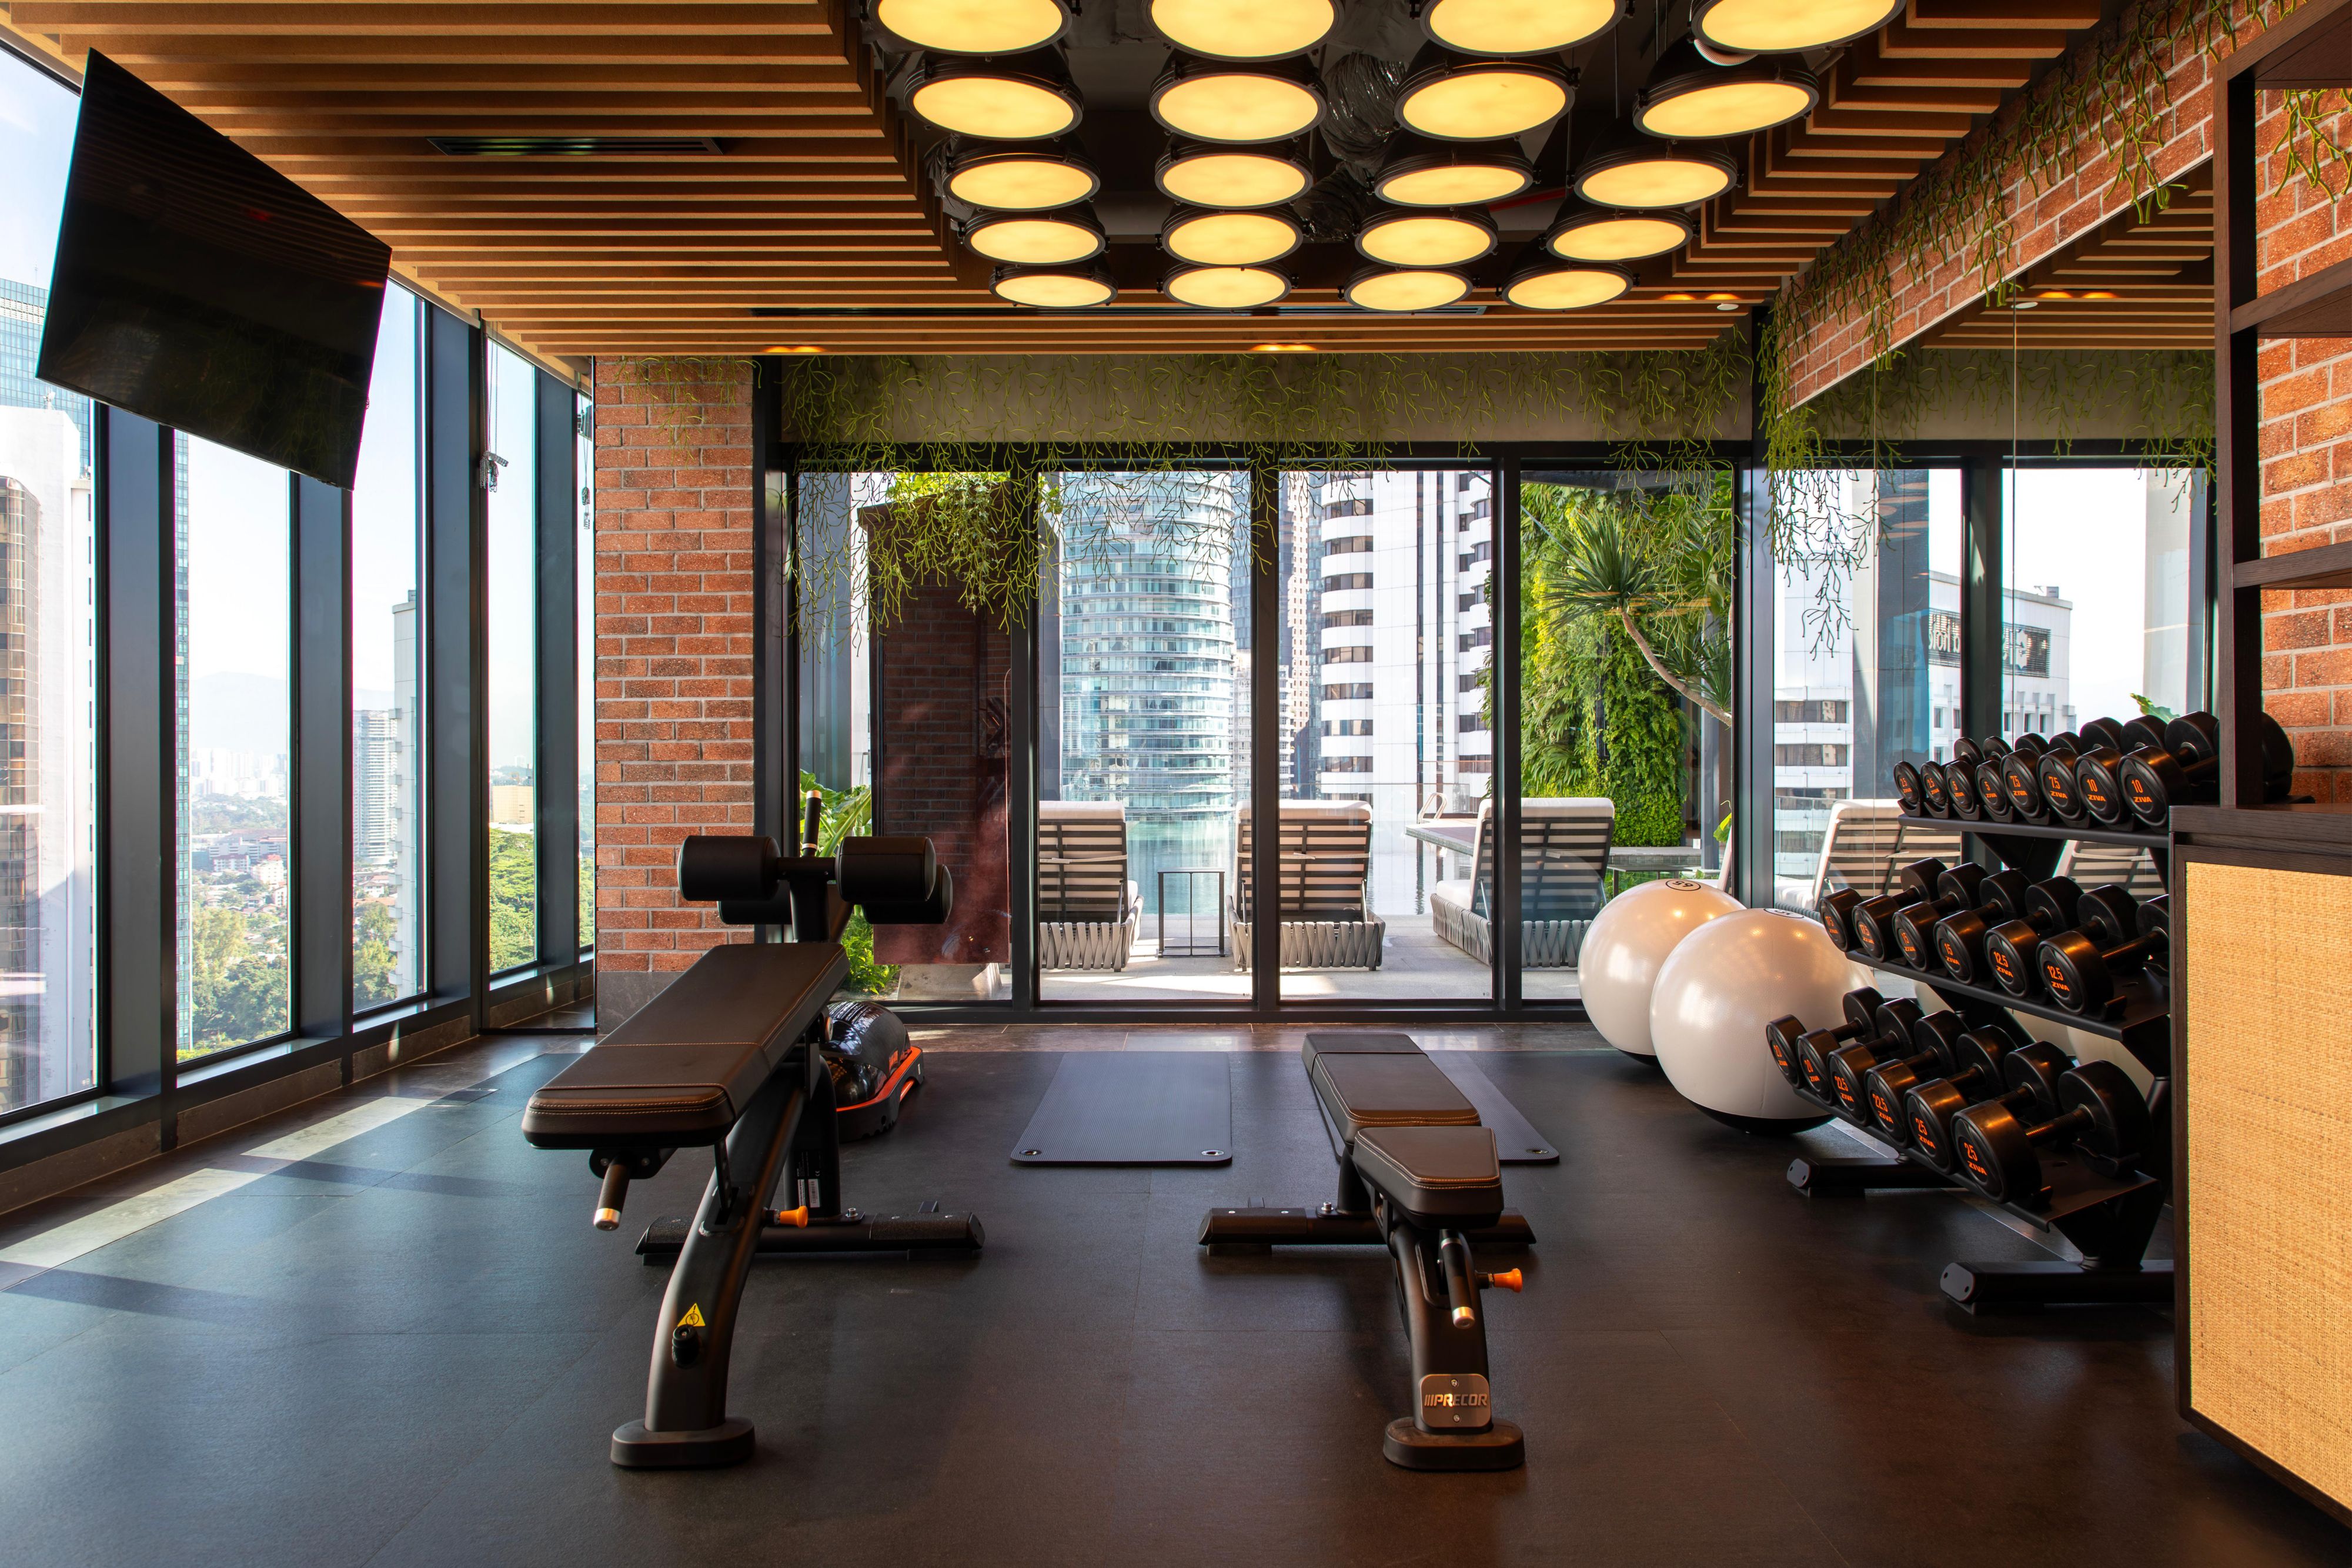 Our fitness centre is equipped with the latest equipment and is open 24 hours a day. Take care of your mind and body at any time of day on the 25th floor with the latest cardio machines in the fitness centre.